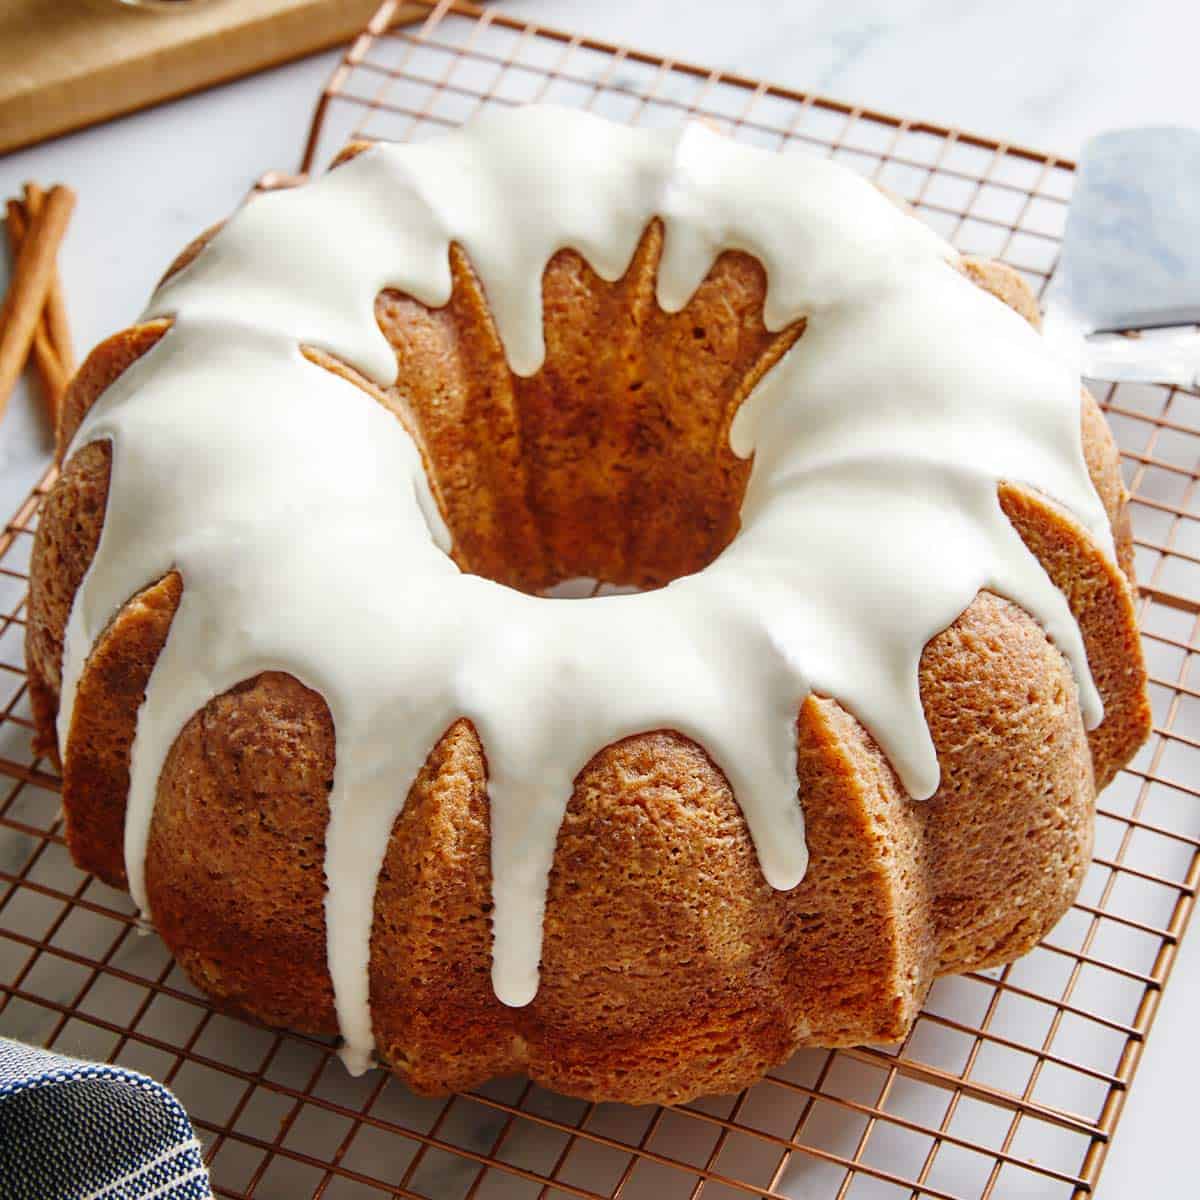 A delicious cinnamon roll pound cake on a wire rack drizzled with a glaze icing.